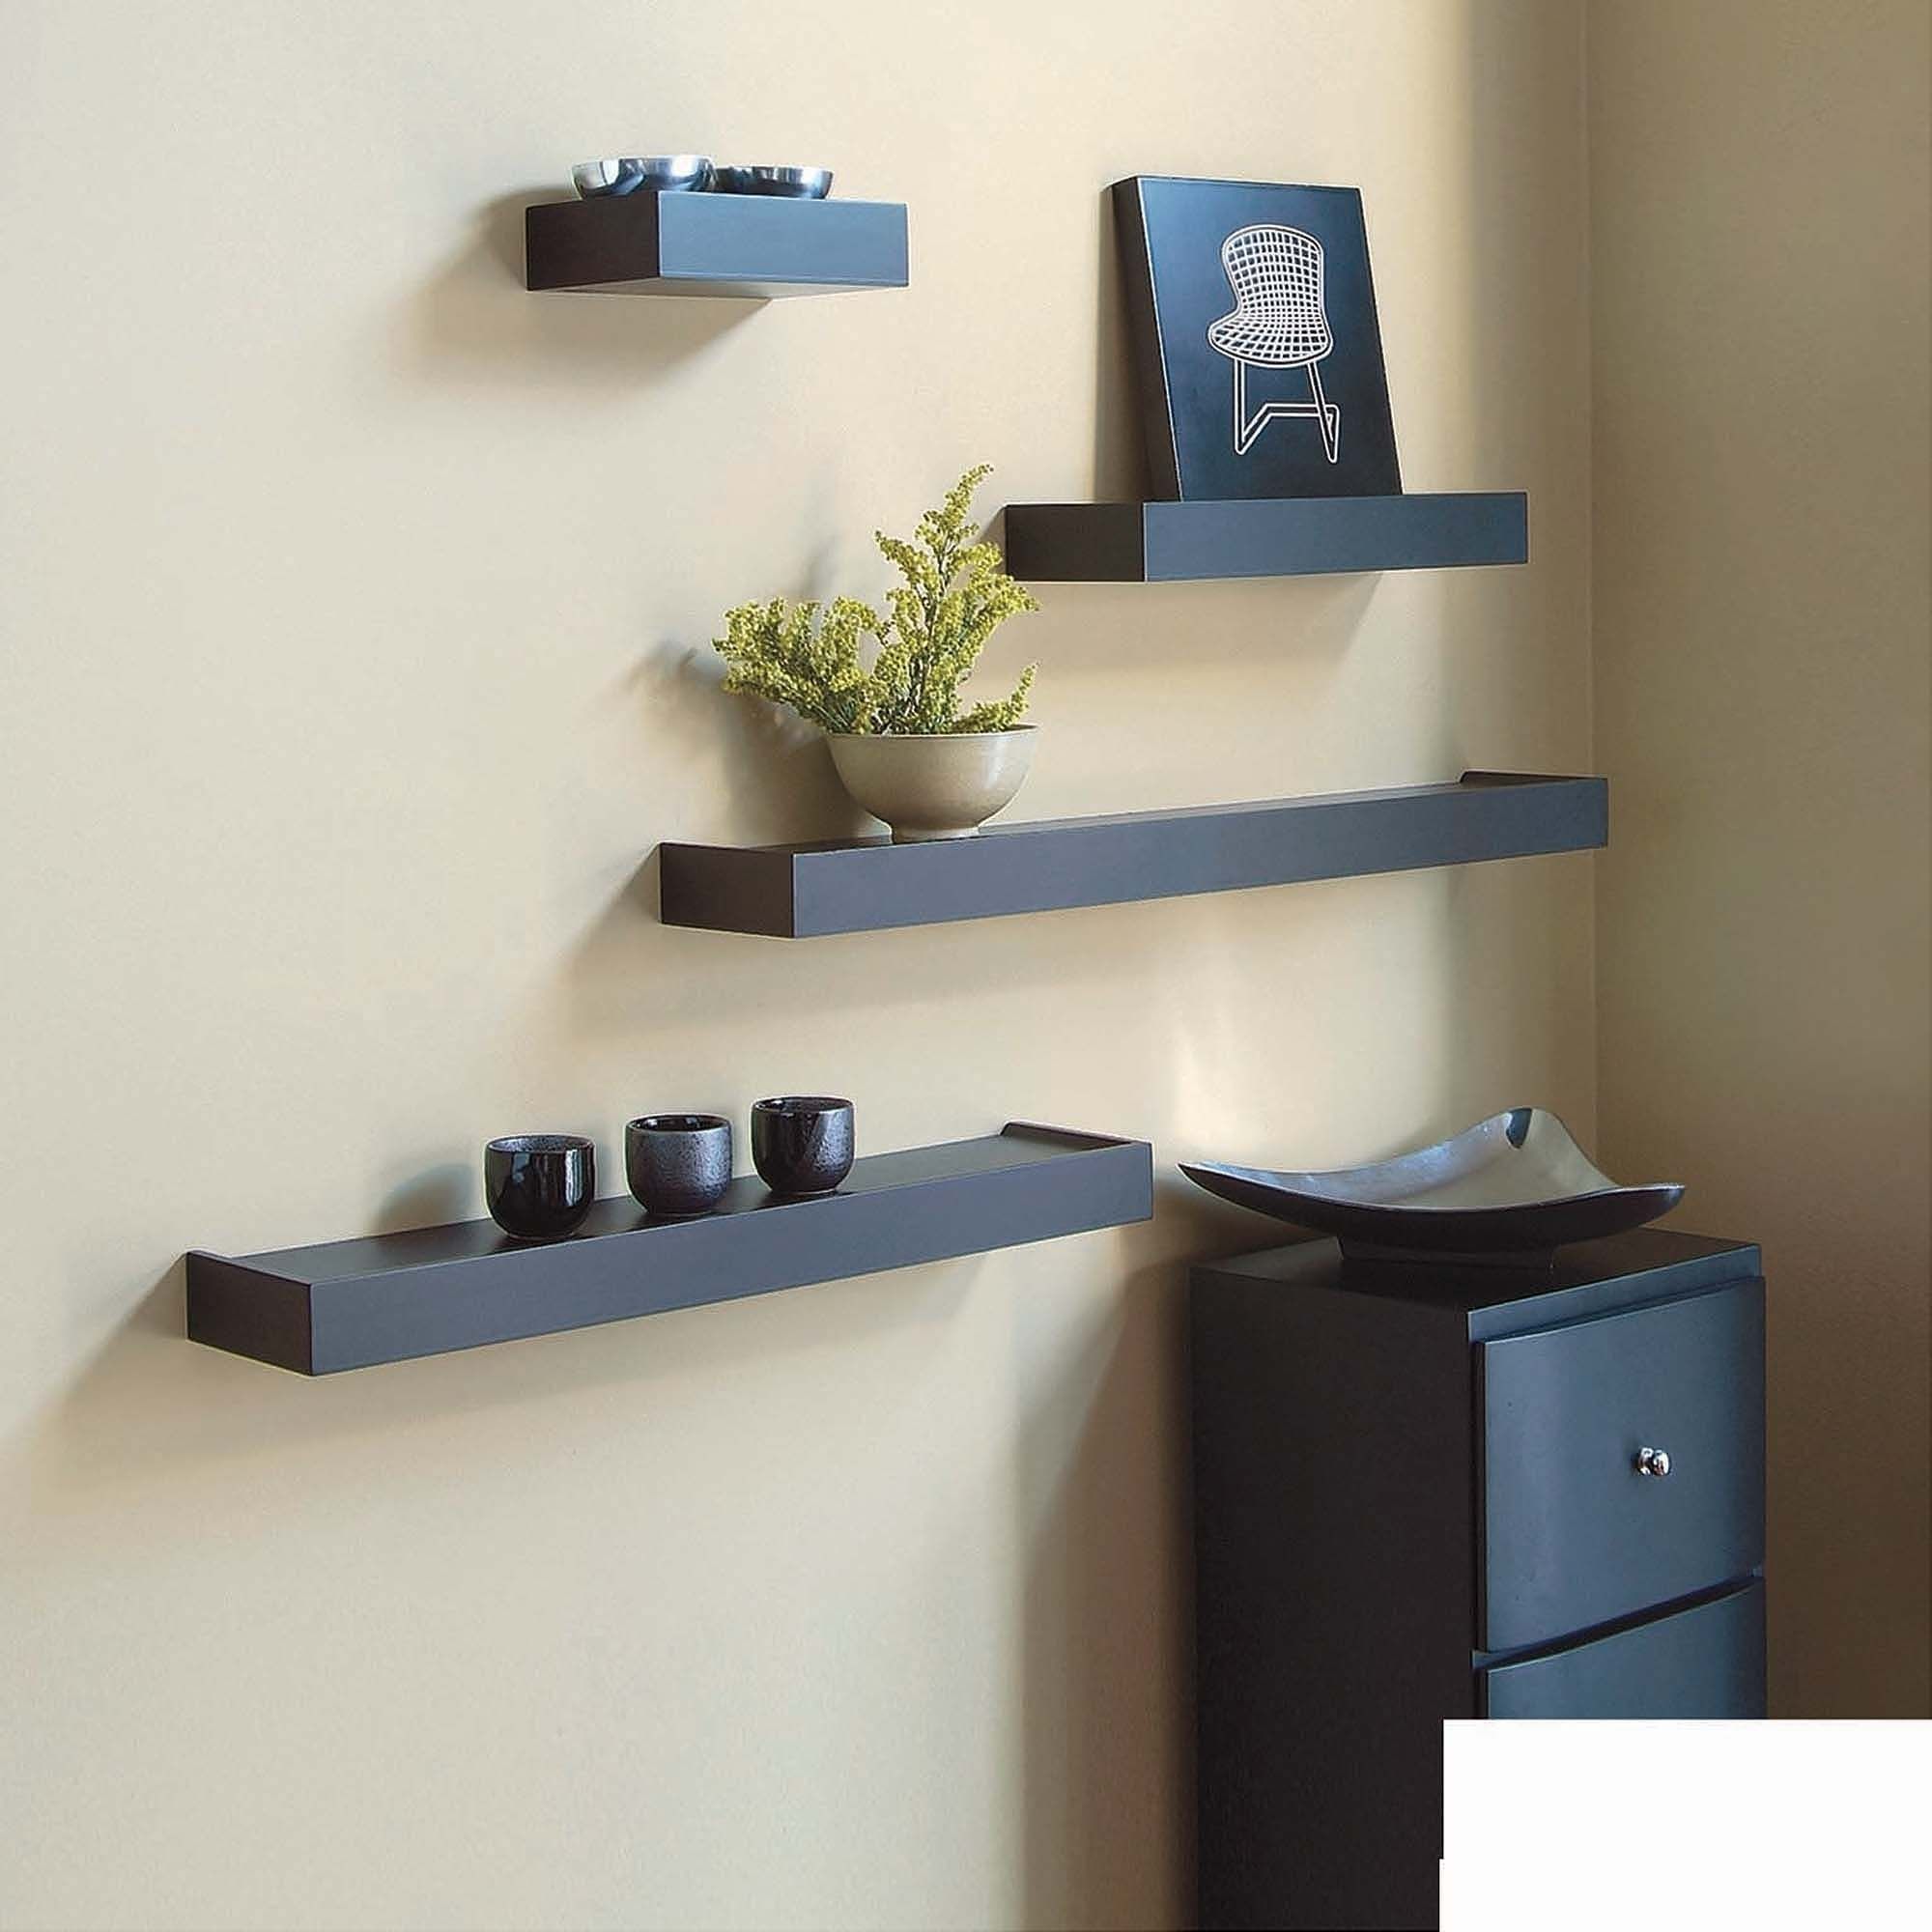 Creatice Floating Shelves Ideas for Simple Design